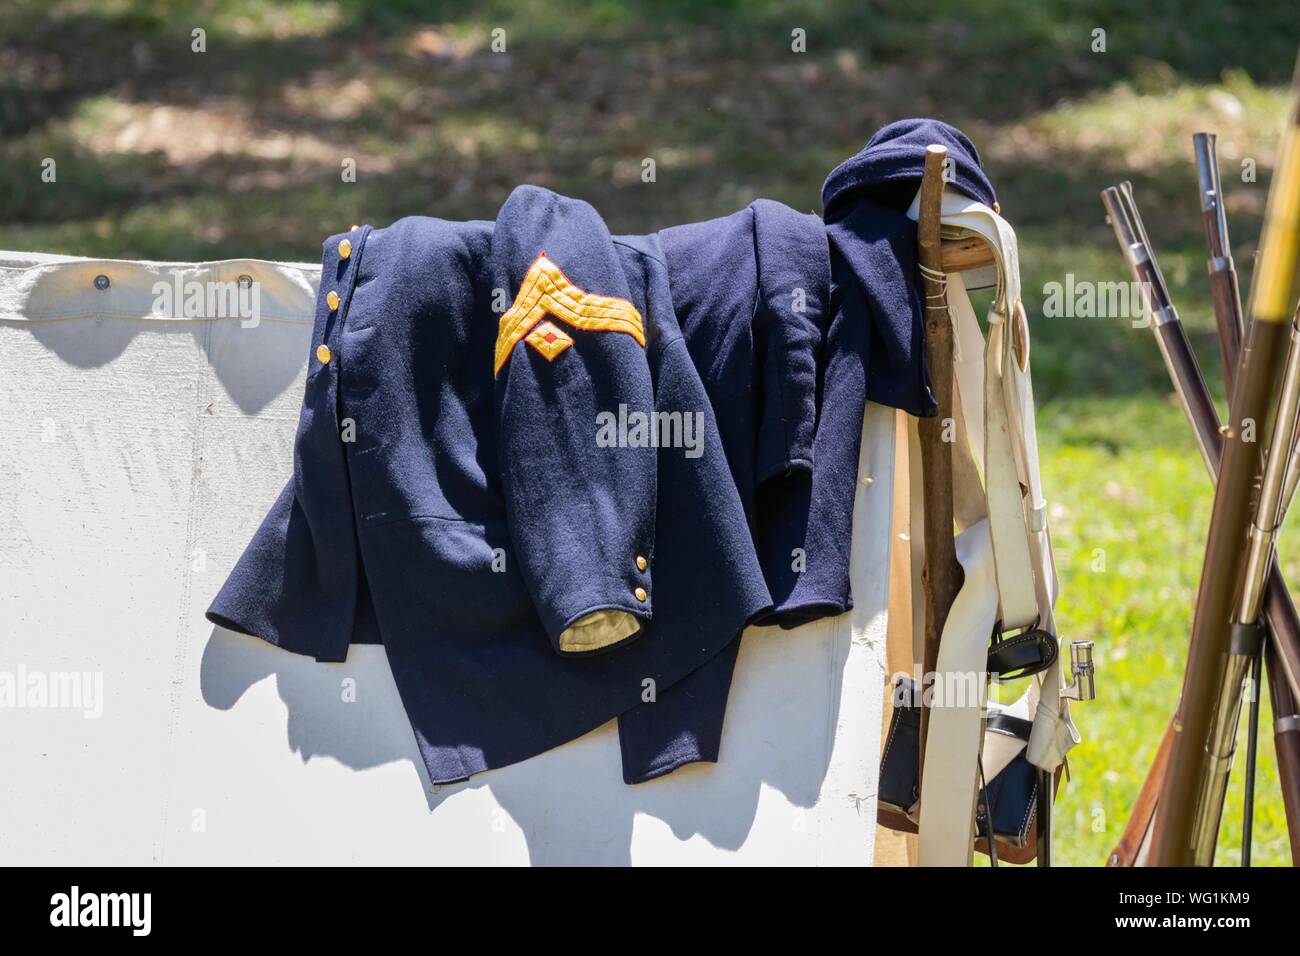 Union army jacket and gear lay on a white canvas tent during an American Civil War Reenactment Stock Photo